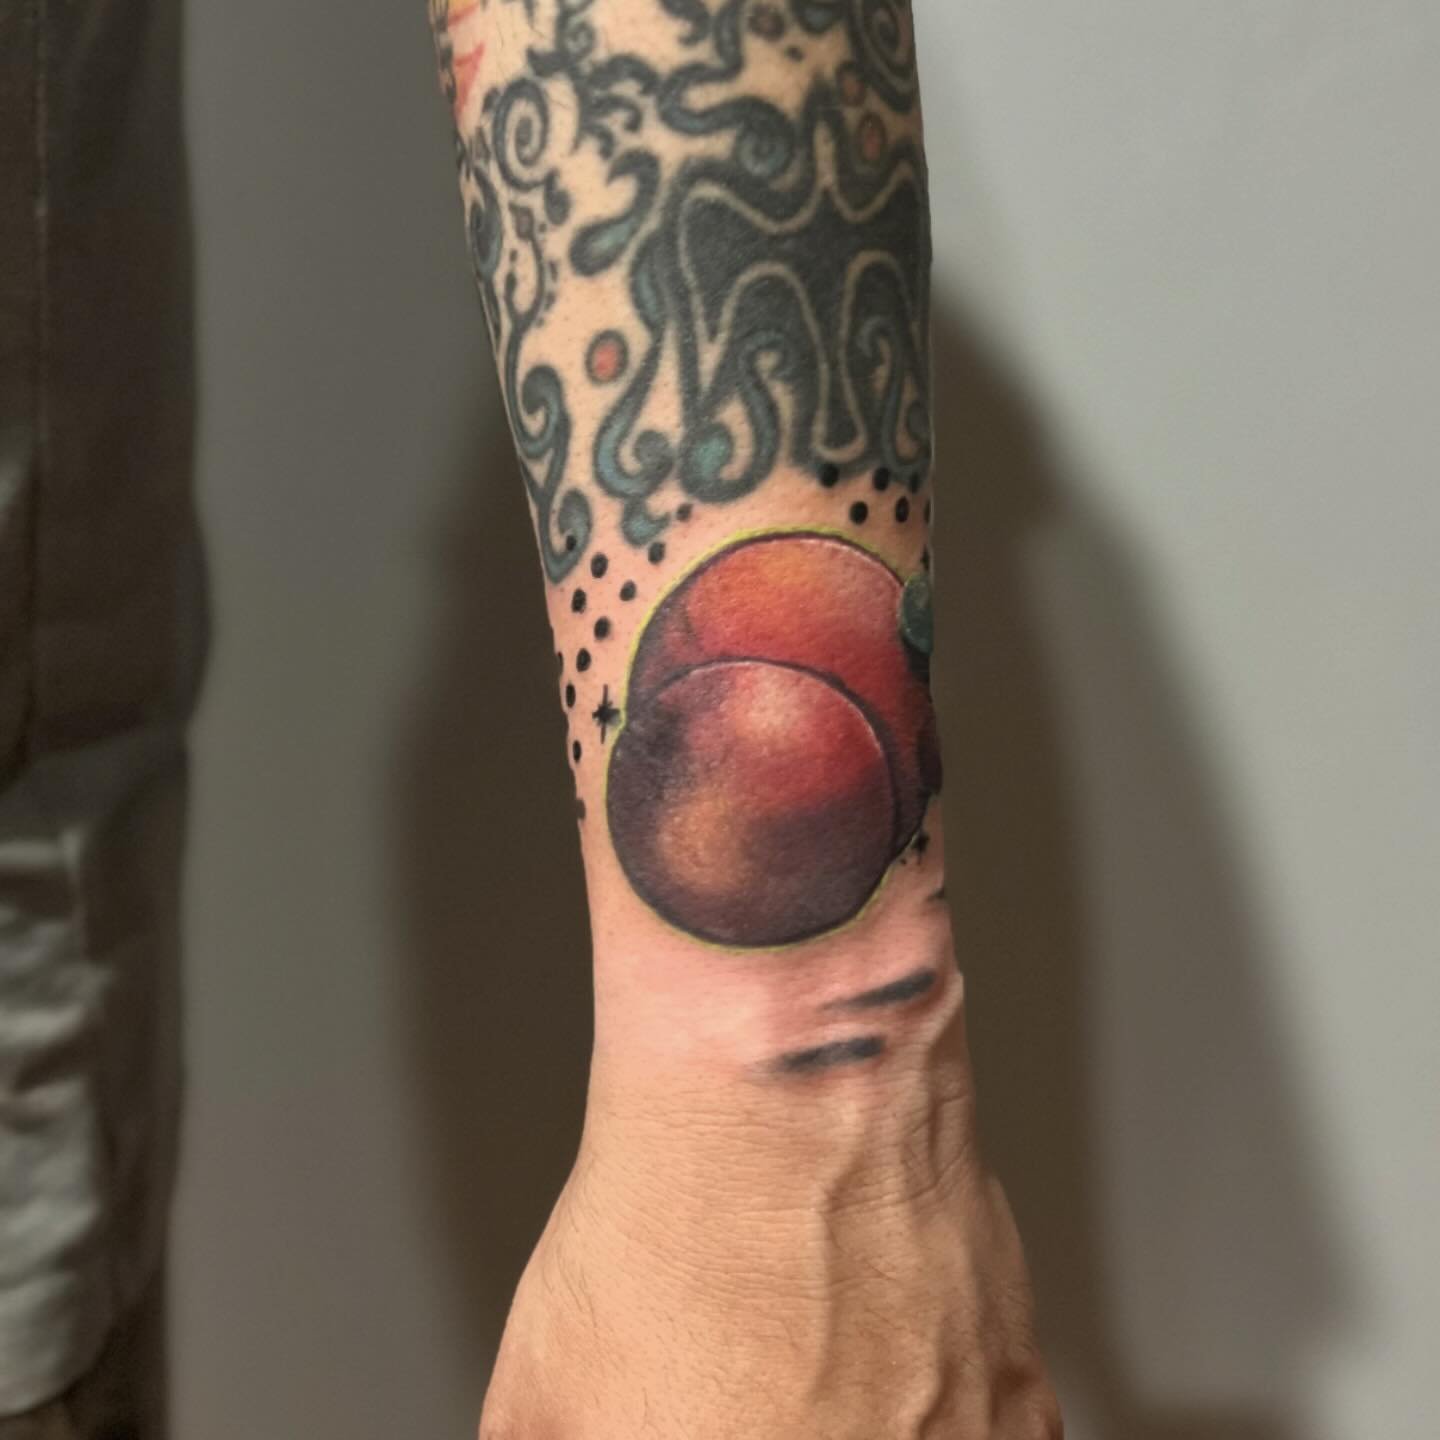 Abstract Orbs tattoo. (This tattoo is a symbol of family unity.  Each color represents a birth month). Thanks for the trust Ricky and thank you for looking. 

 #watercolortattoo #moderntattoo #customtattoo #nashvilletattooartist  #abstracttattoos